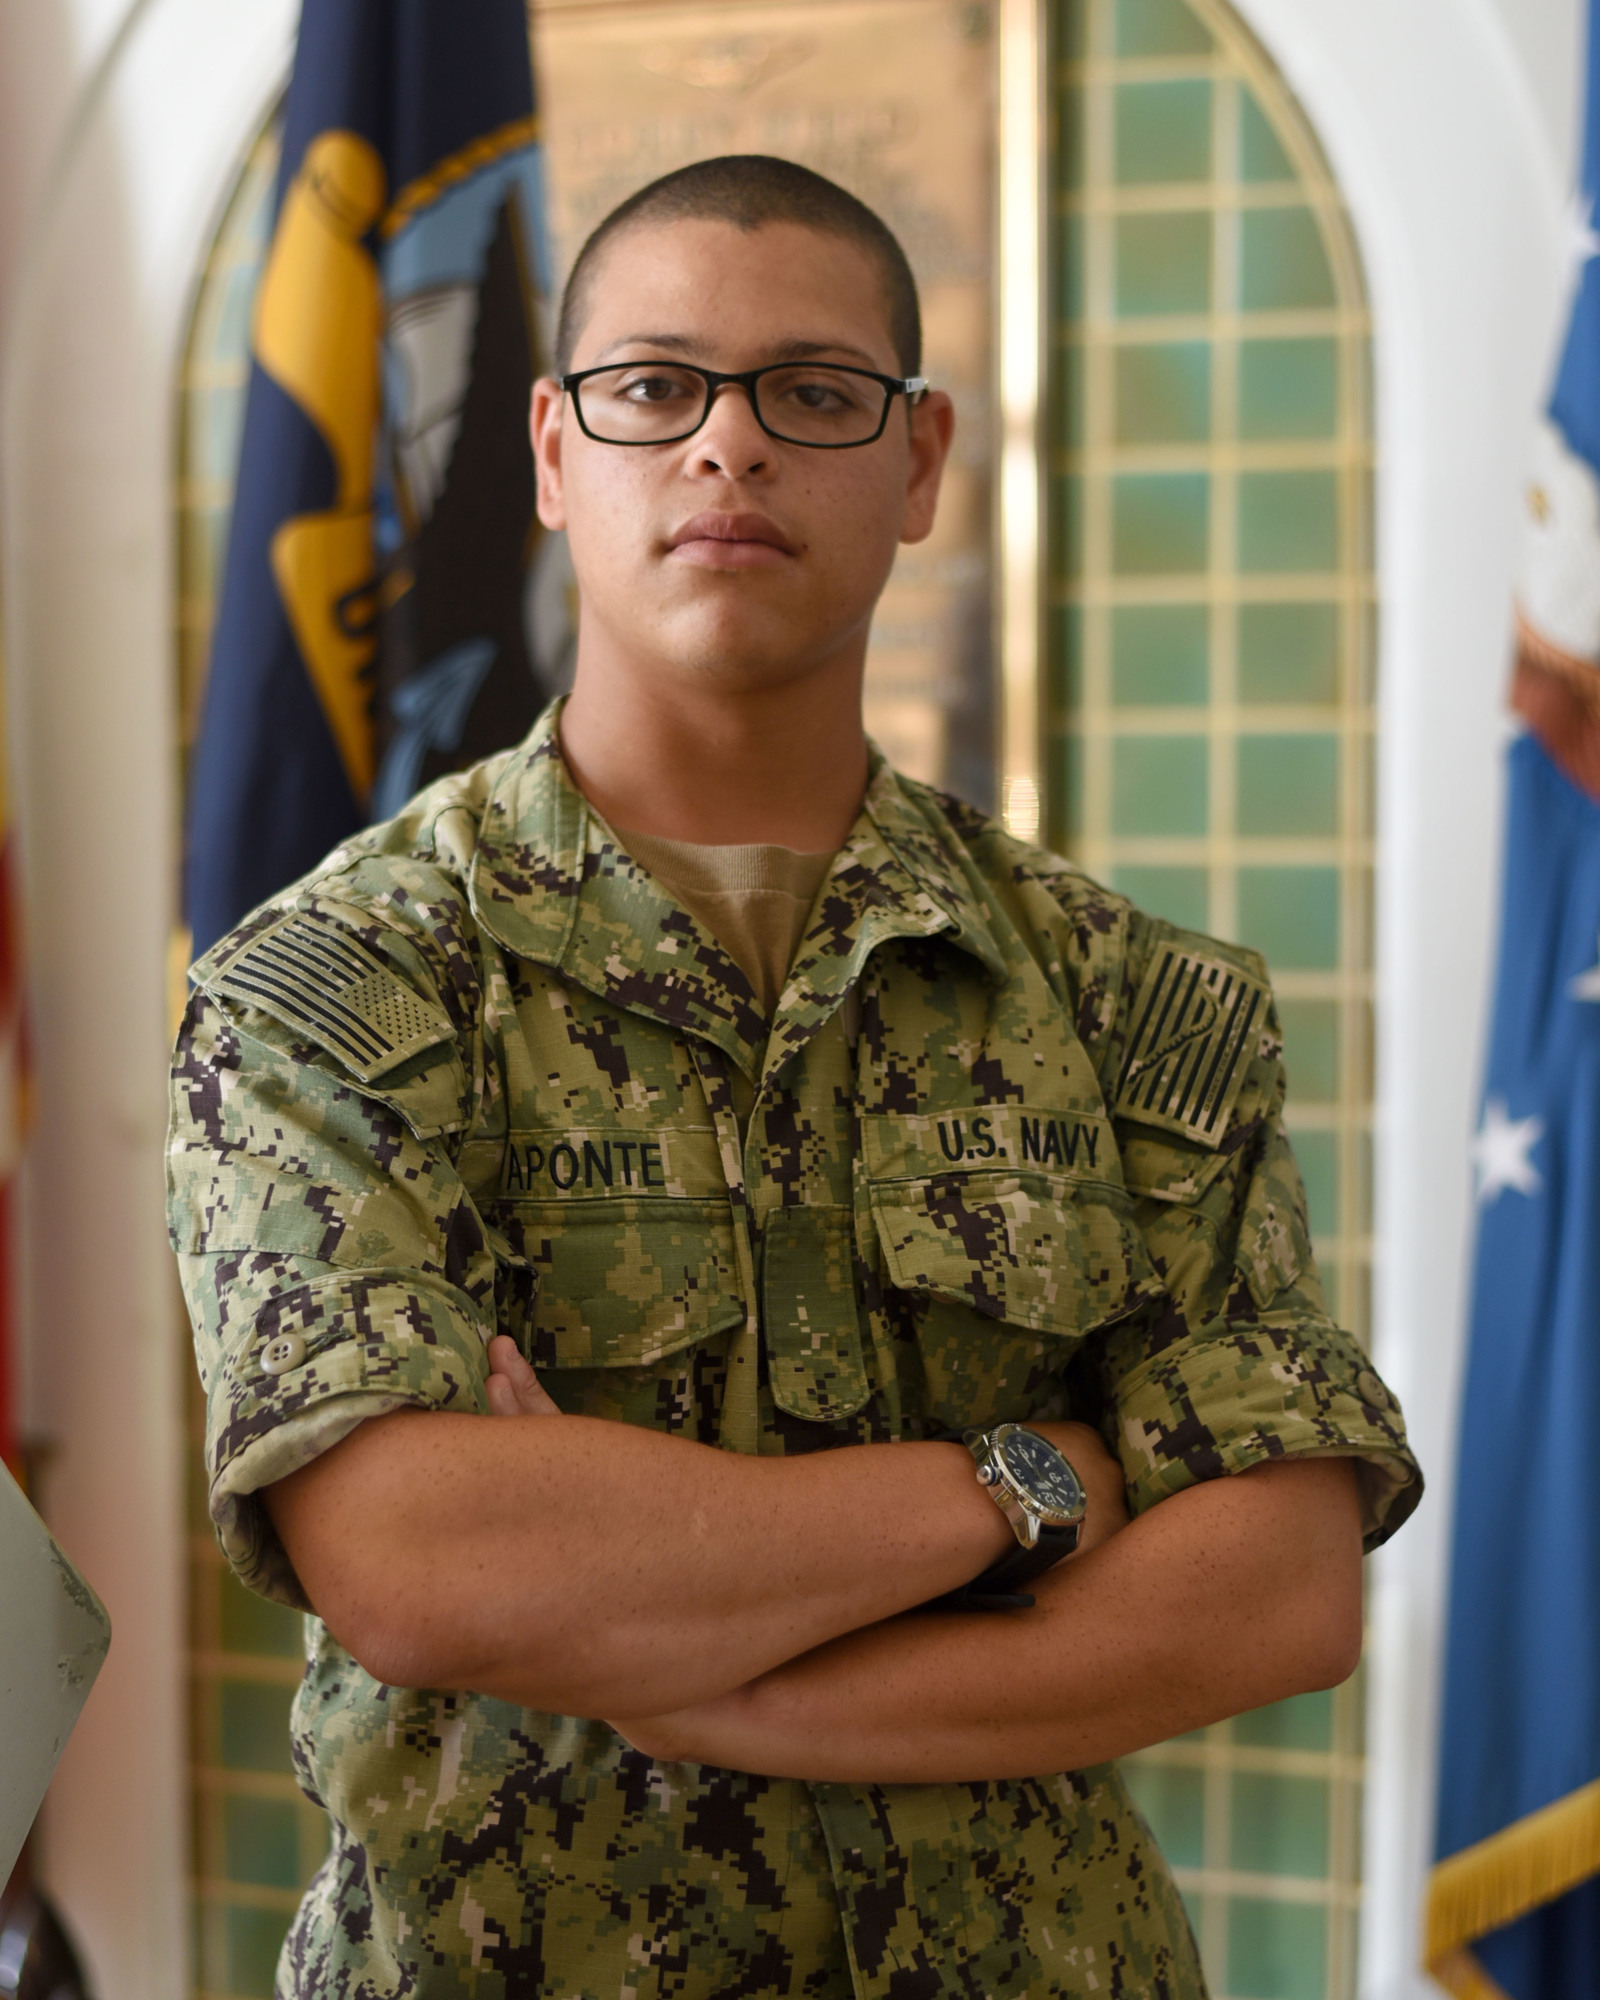 Seaman Wilfredo Aponte, a Palm Coast native, works as a cryptologic technician and operates out of the Information Warfare Training Command Corry Station. Courtesy photo by Mass Communication Specialist 1st Class Amanda Rae Moreno